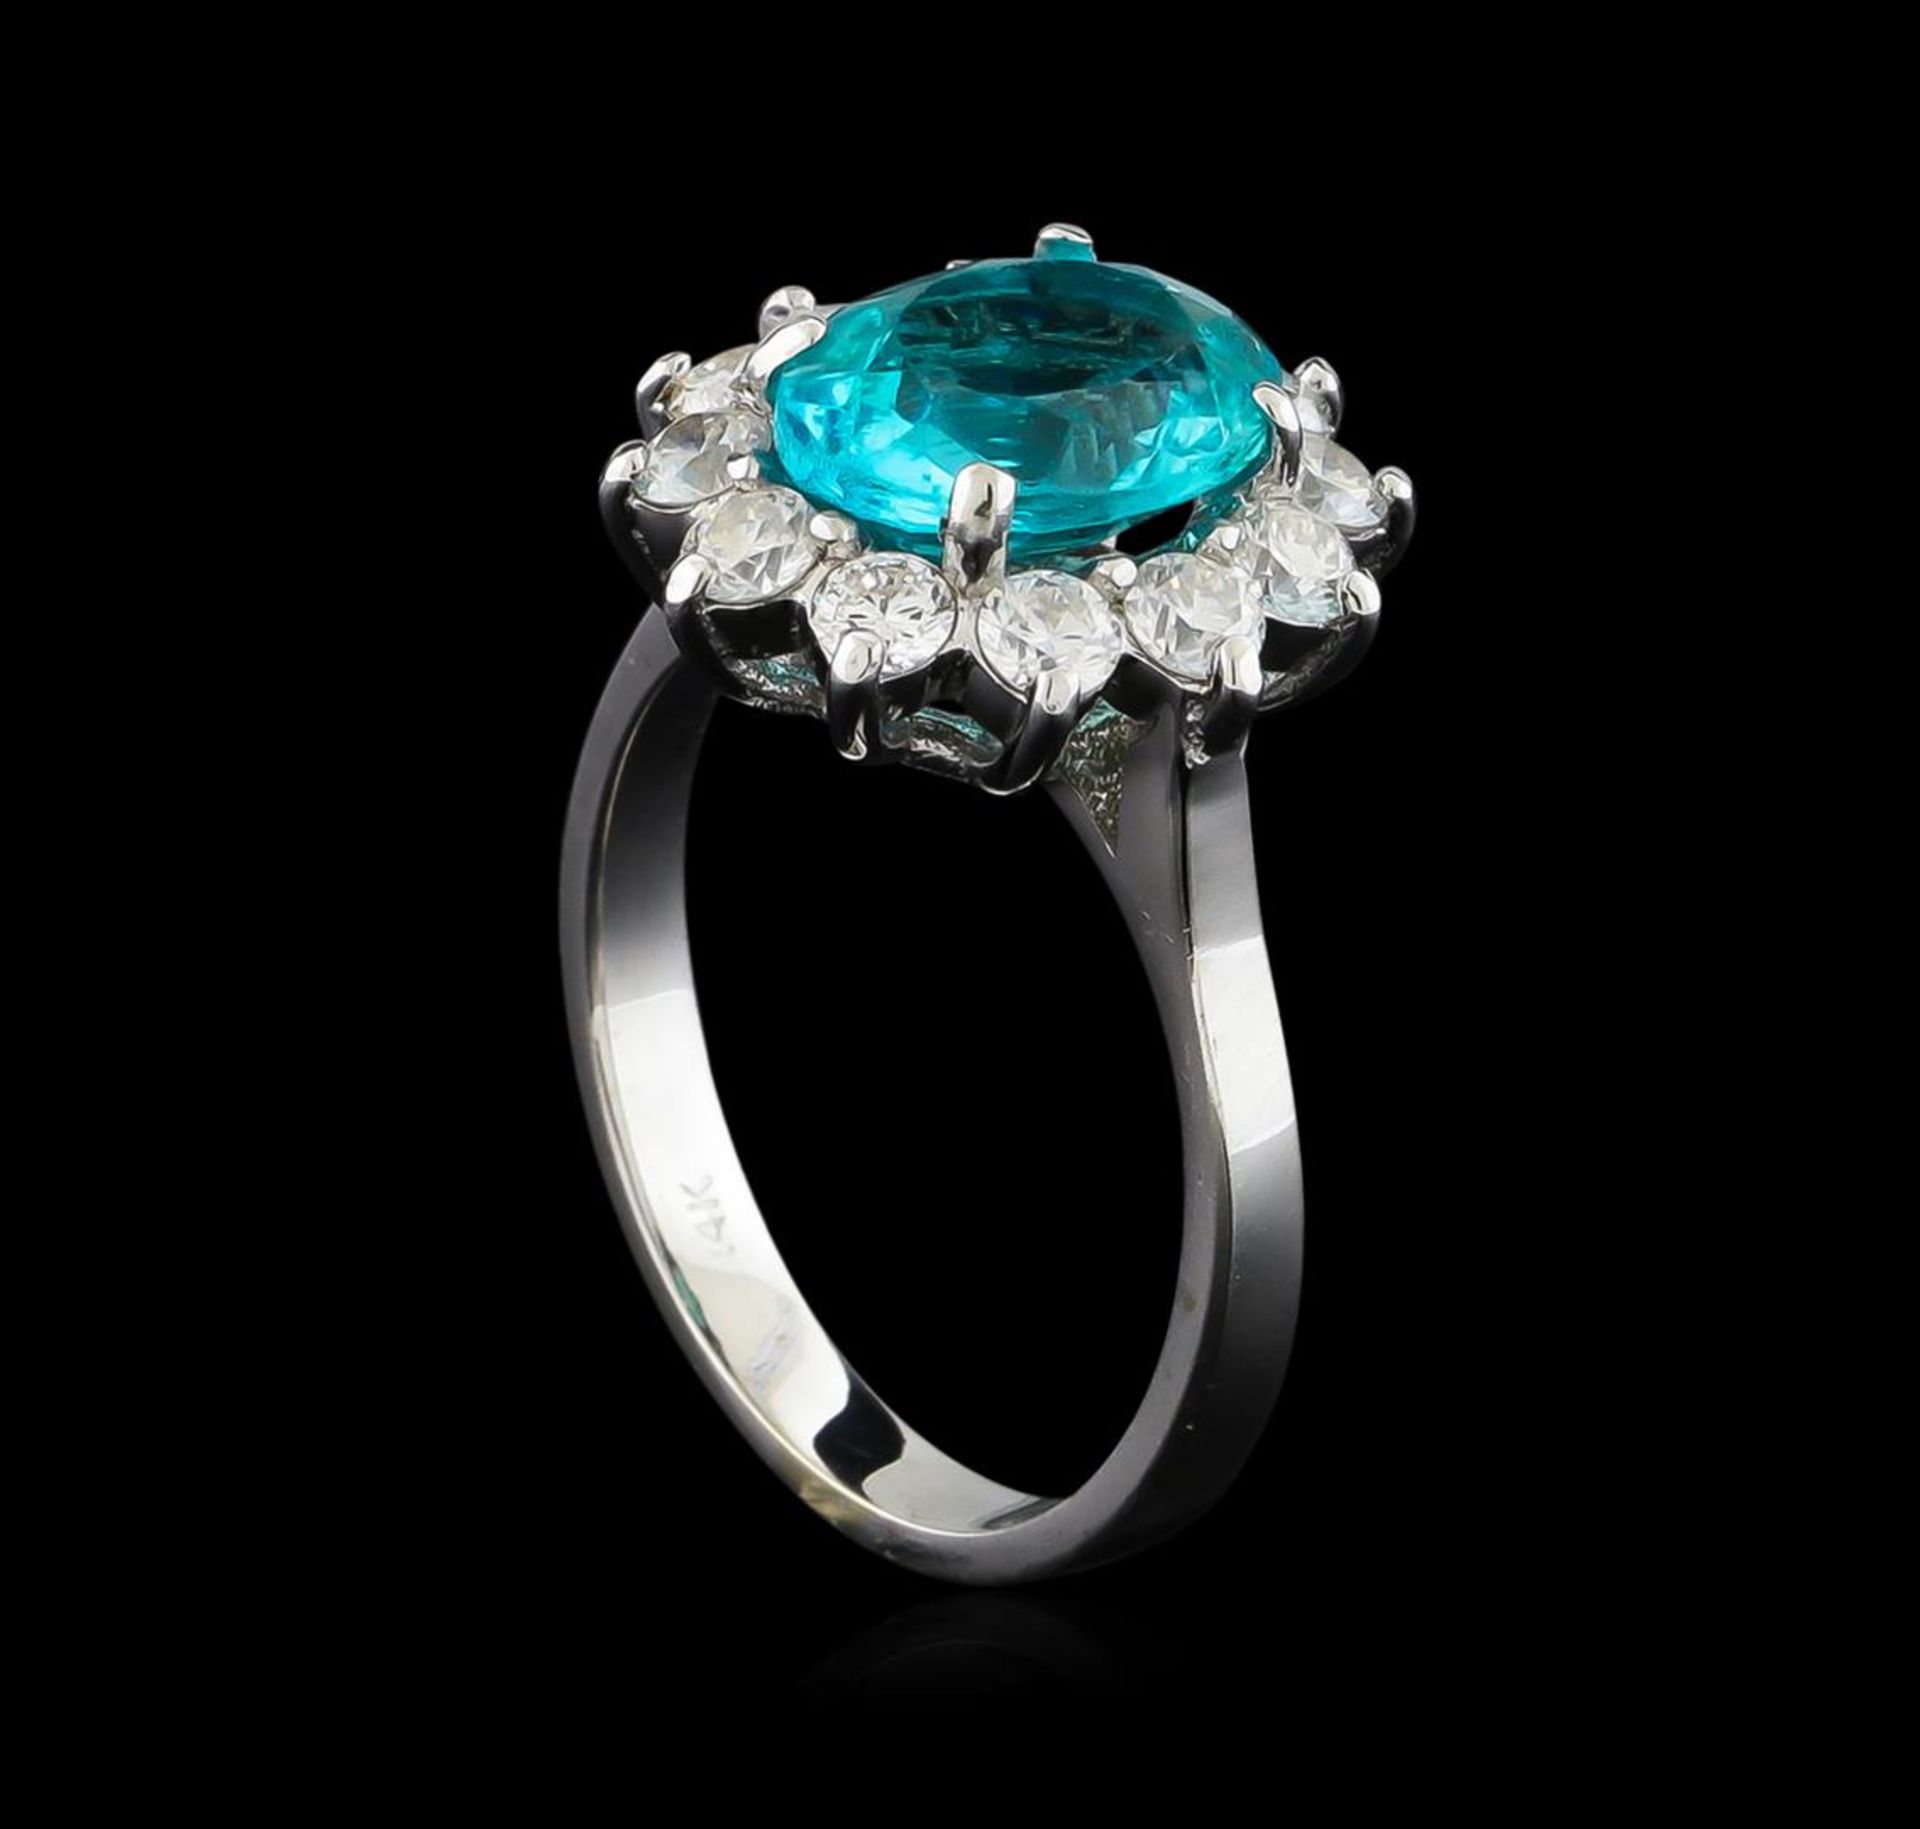 2.78 ctw Apatite and Diamond Ring - 14KT White Gold - Image 3 of 4